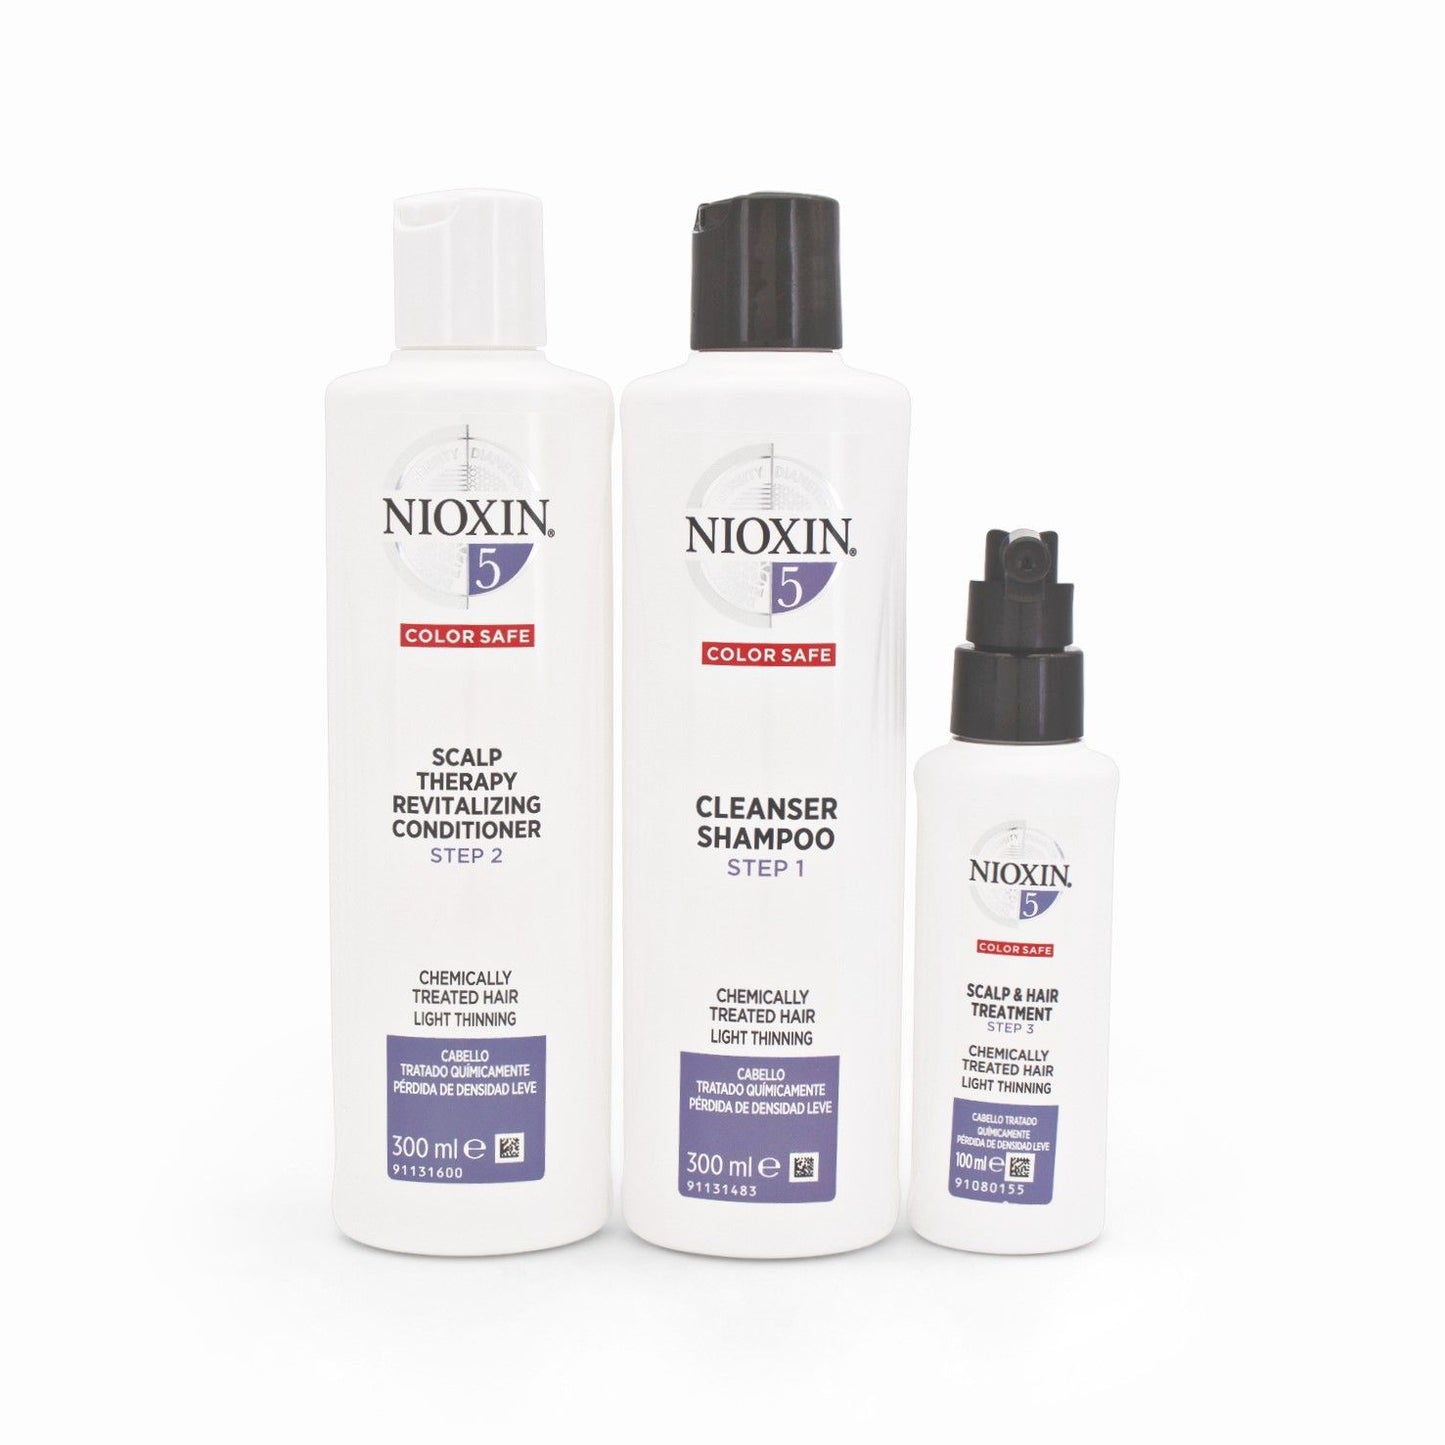 NIOXIN System 5 Chemically Treated Haircare 3 Part Set - Imperfect Box